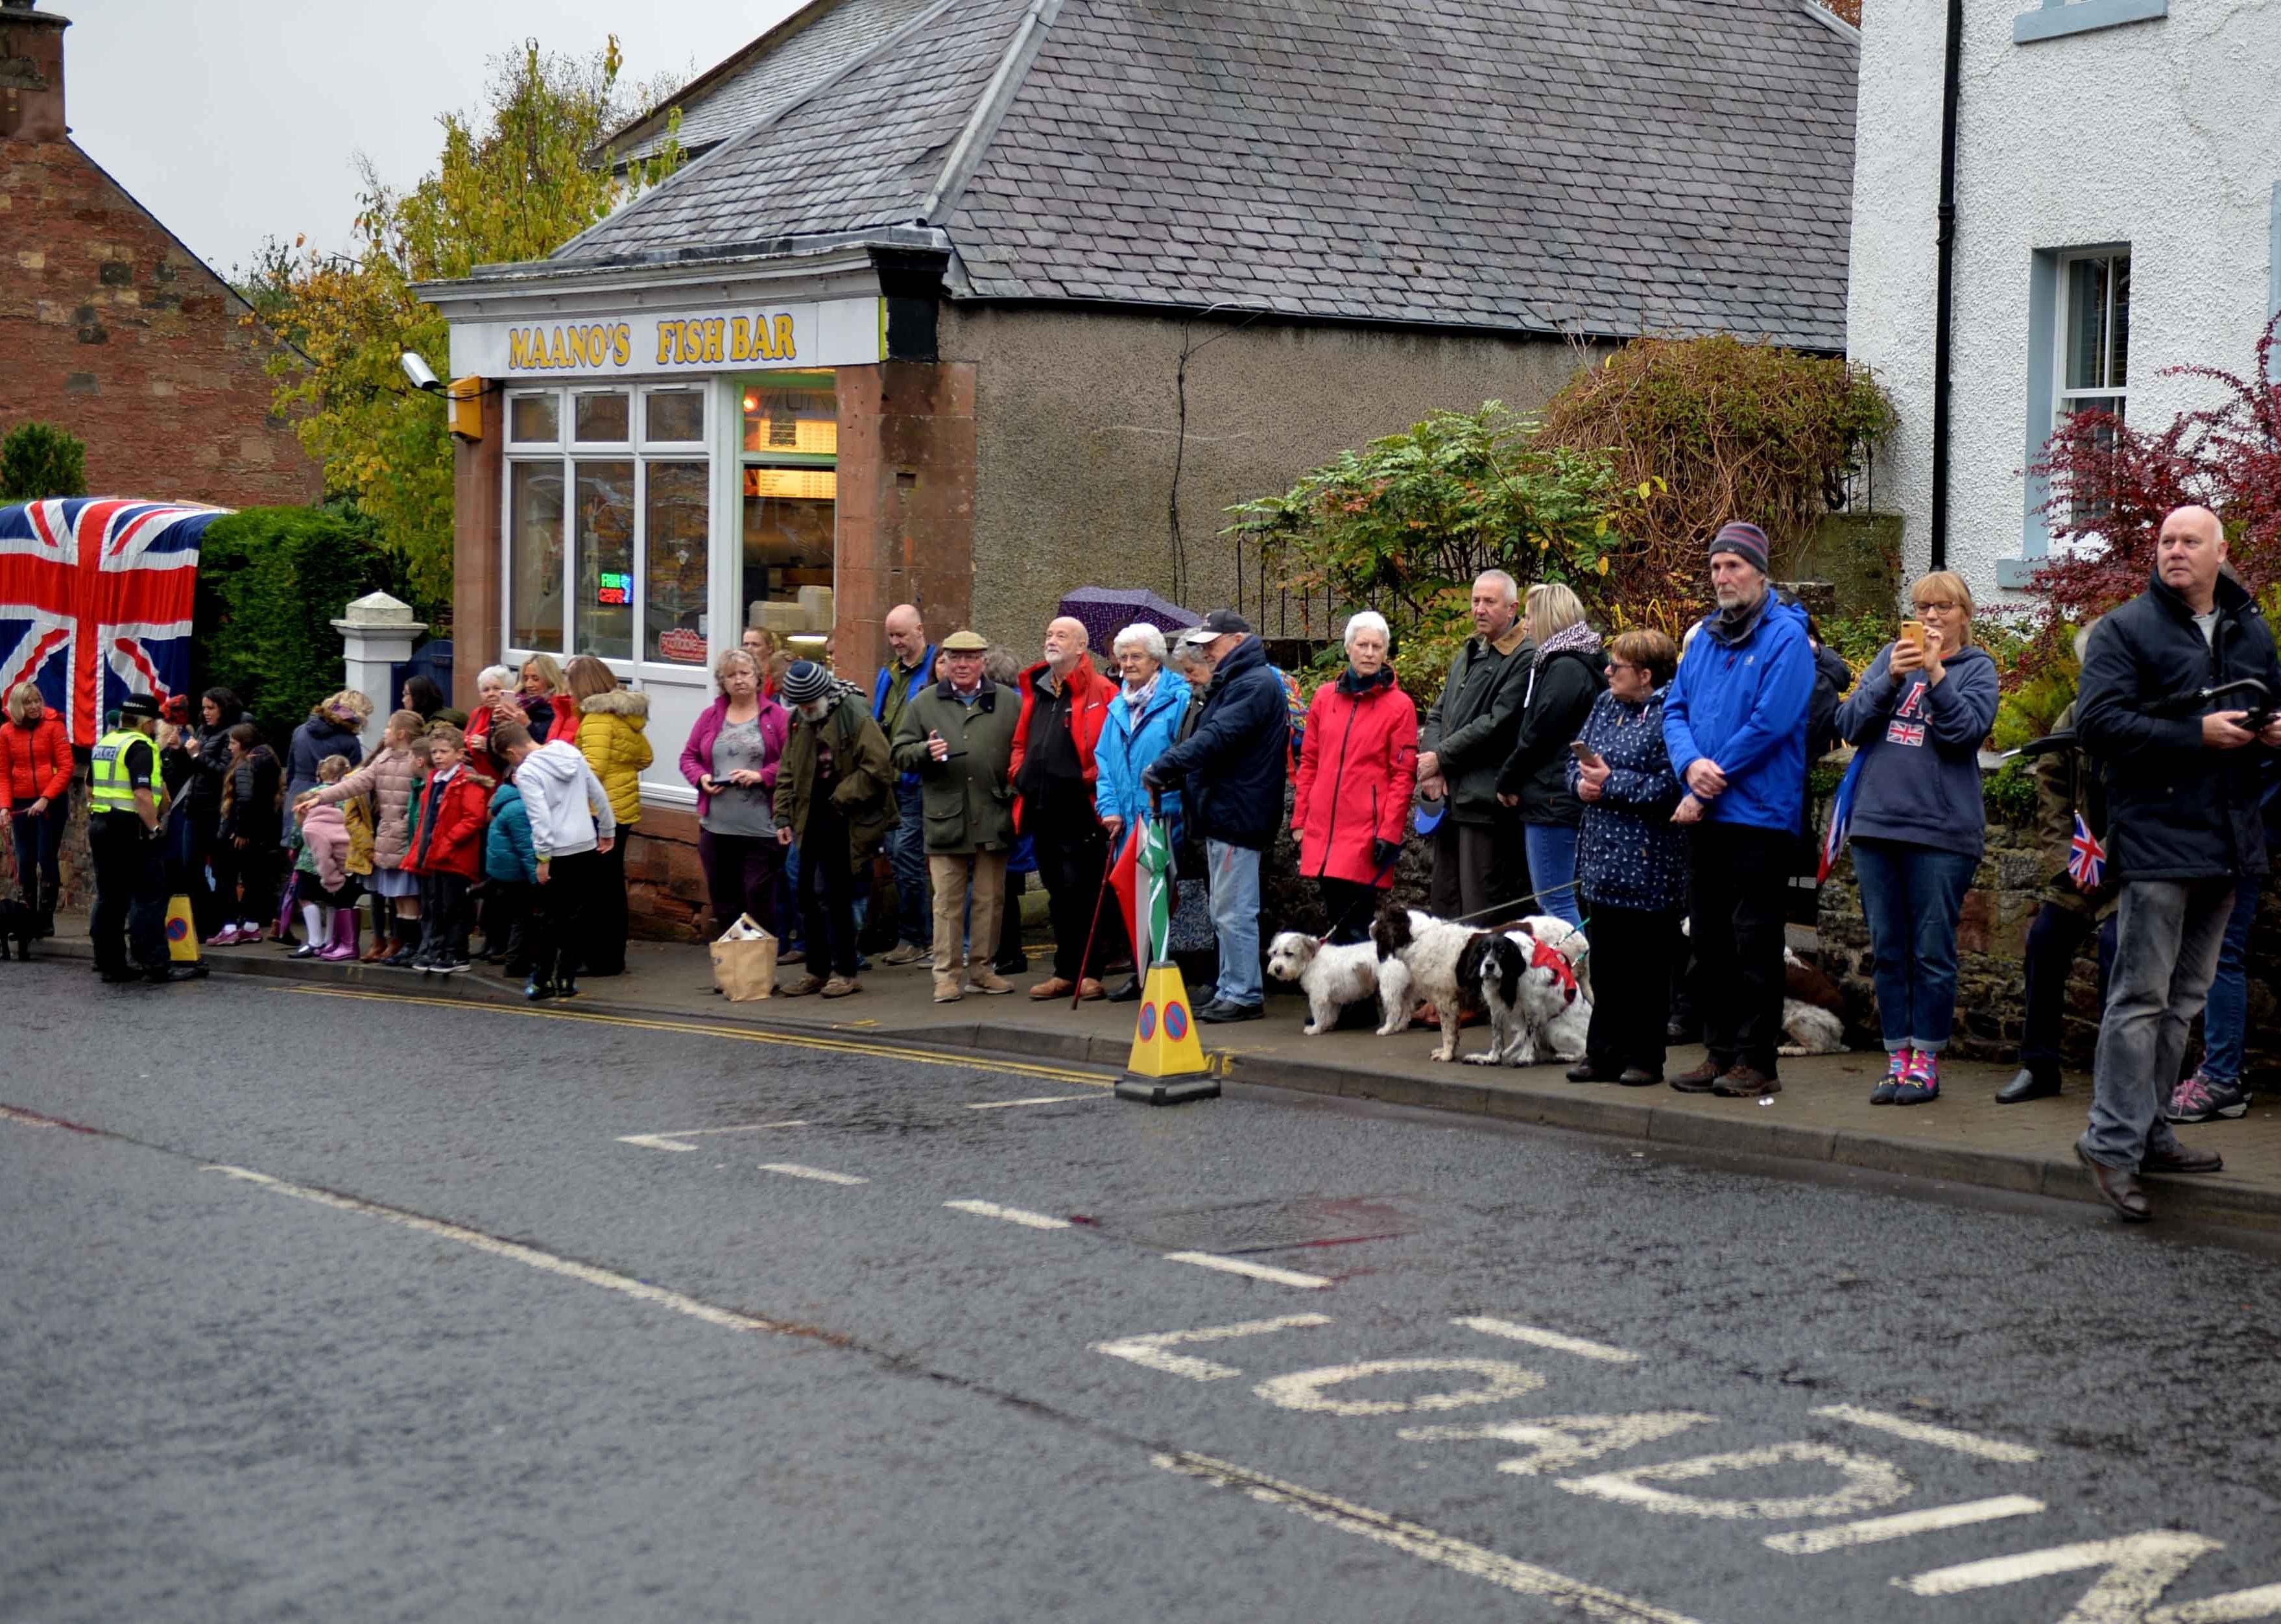 Crowds line Main Street in St Boswells to welcome the royal visitor.